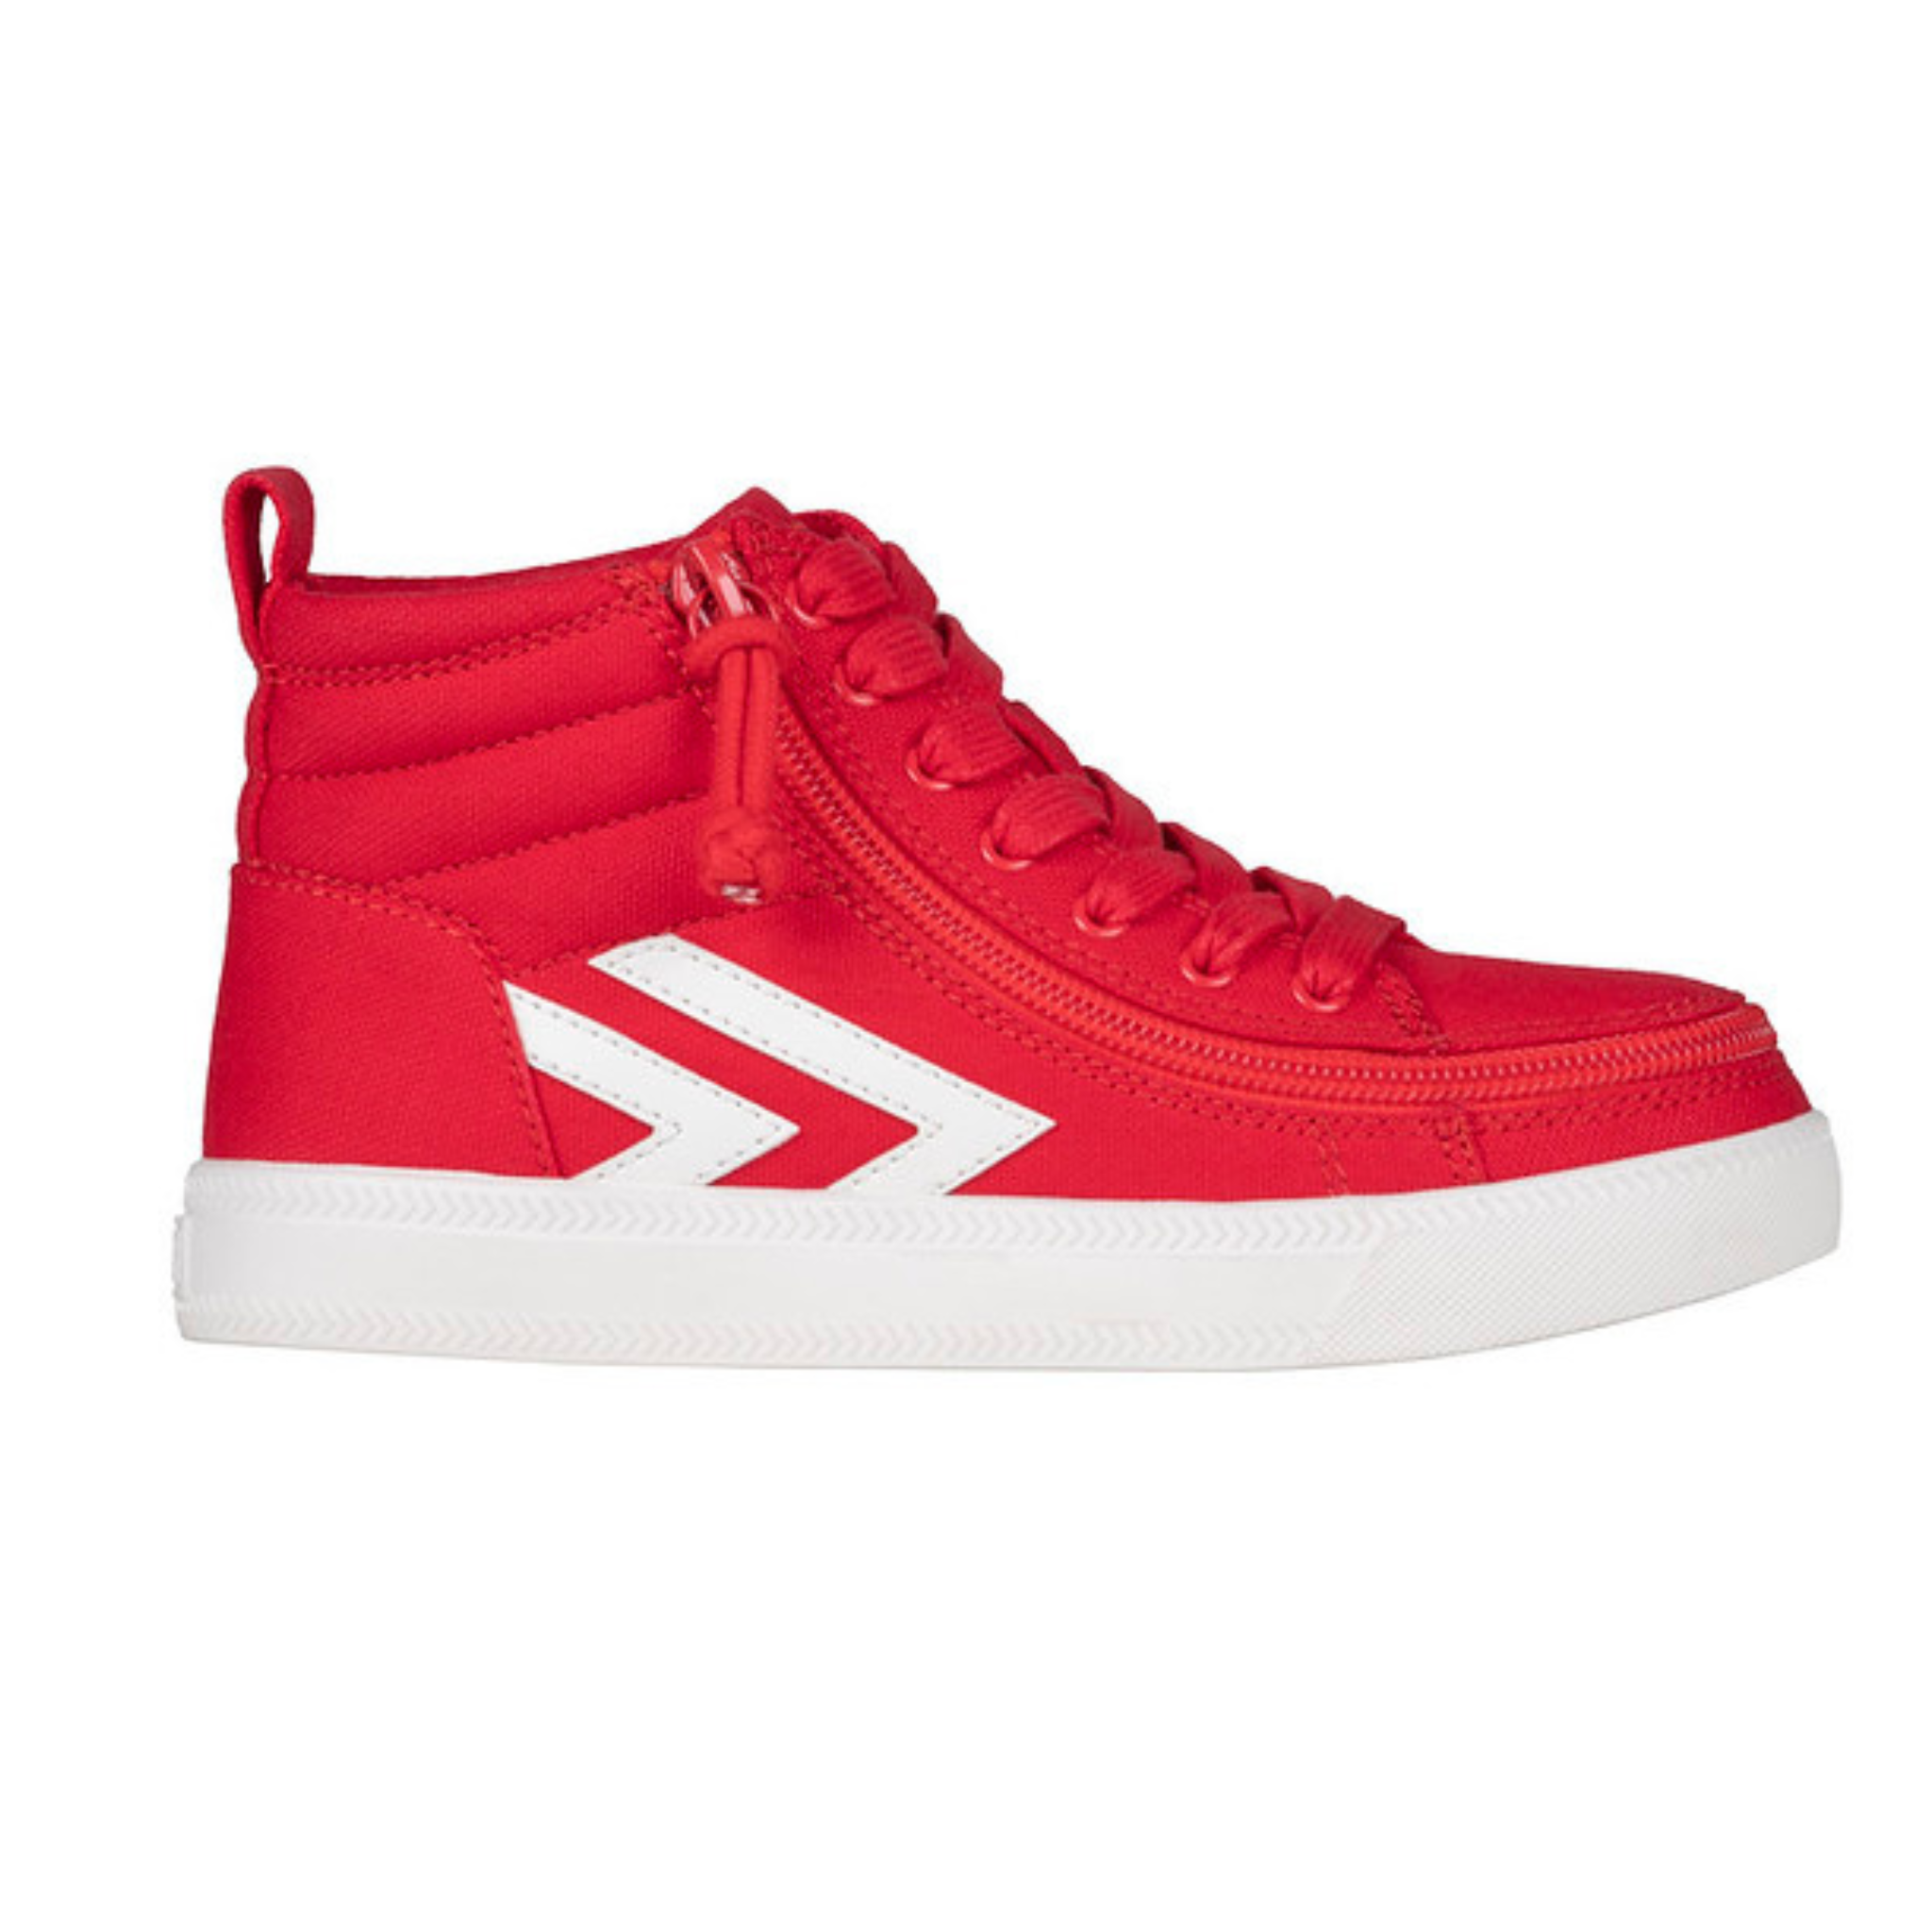 Buy Boys Red Canvas Shoes Online at Best Price | Mothercare India